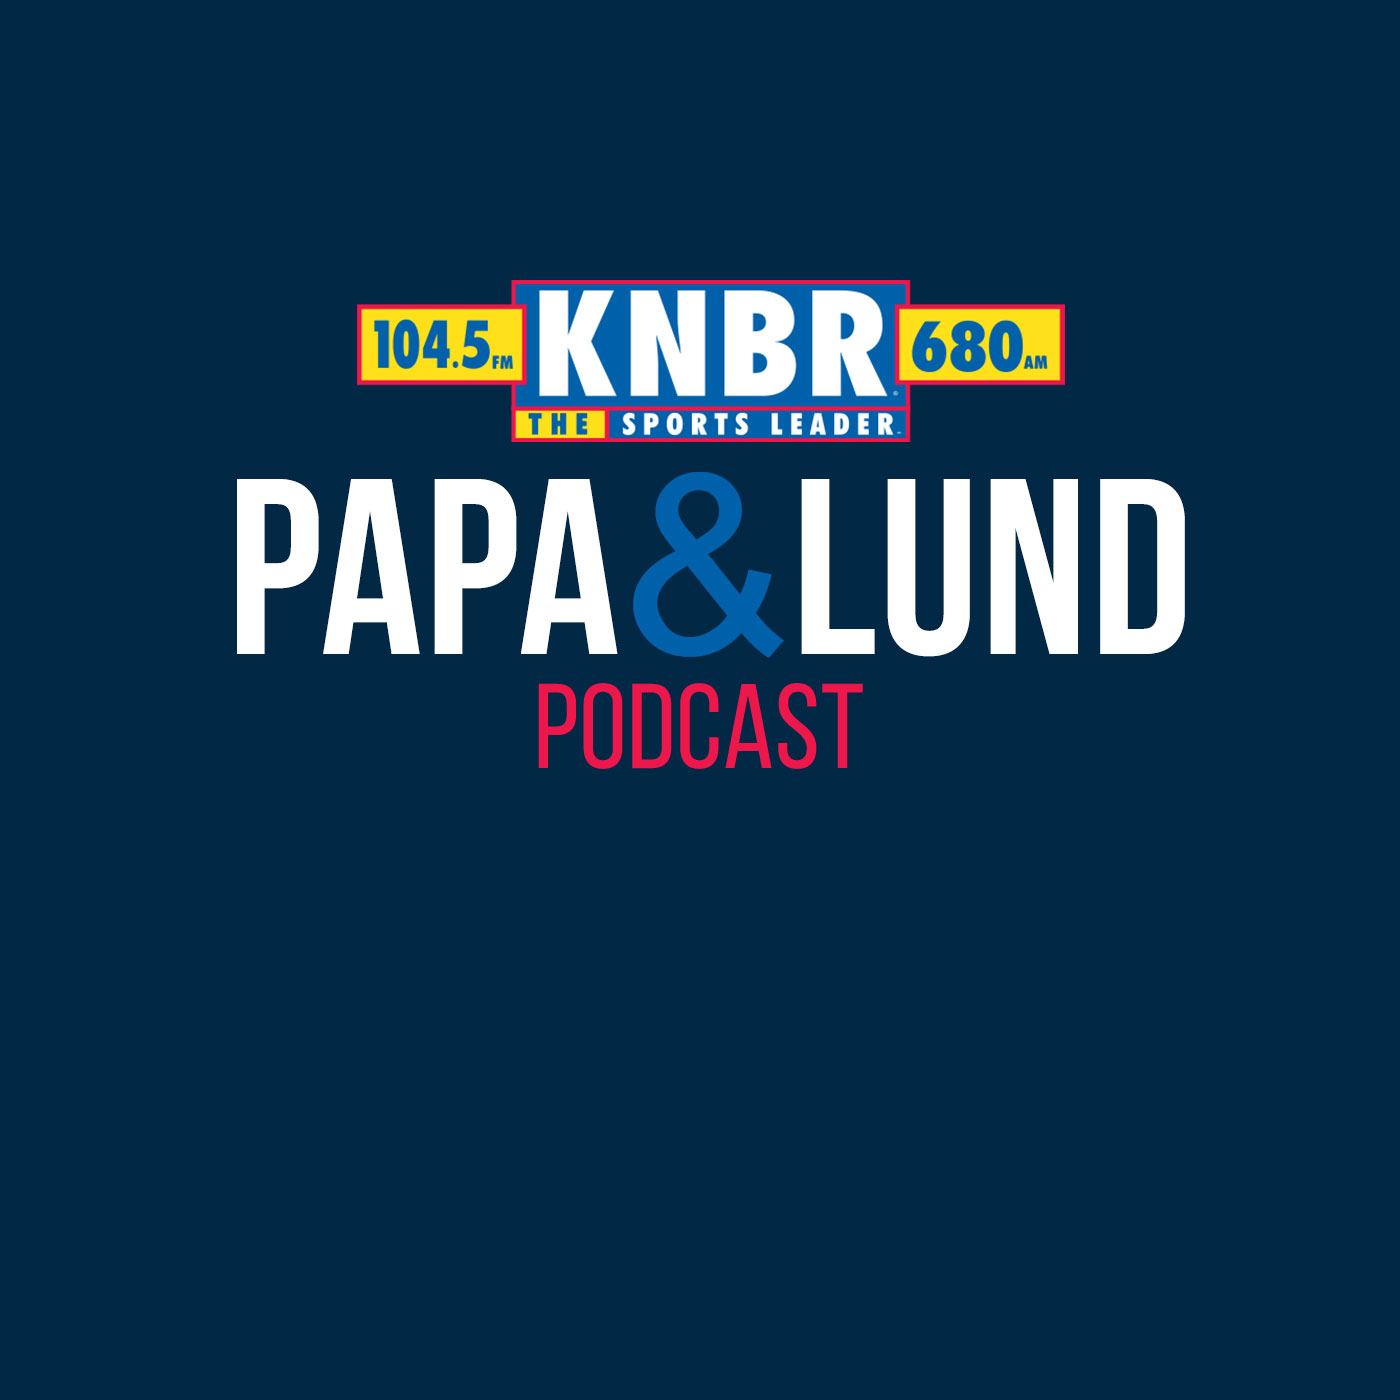 2-14 The 49ers off-season officially begins! David Lombardi joins Papa & Lund to talk what to expect